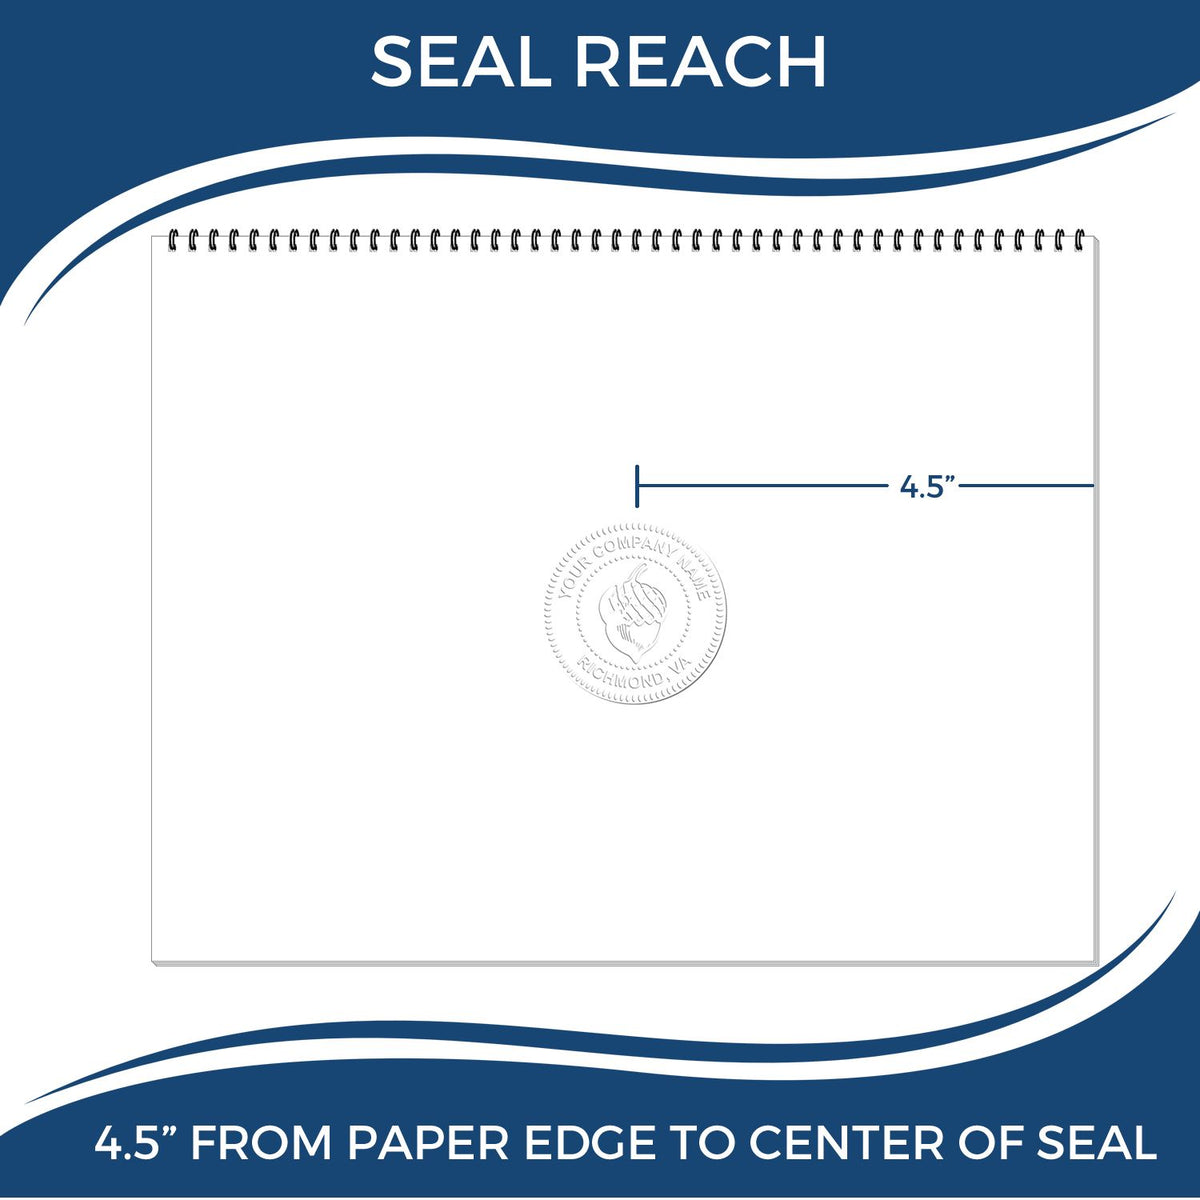 An infographic showing the seal reach which is represented by a ruler and a miniature seal image of the State of Montana Extended Long Reach Engineer Seal